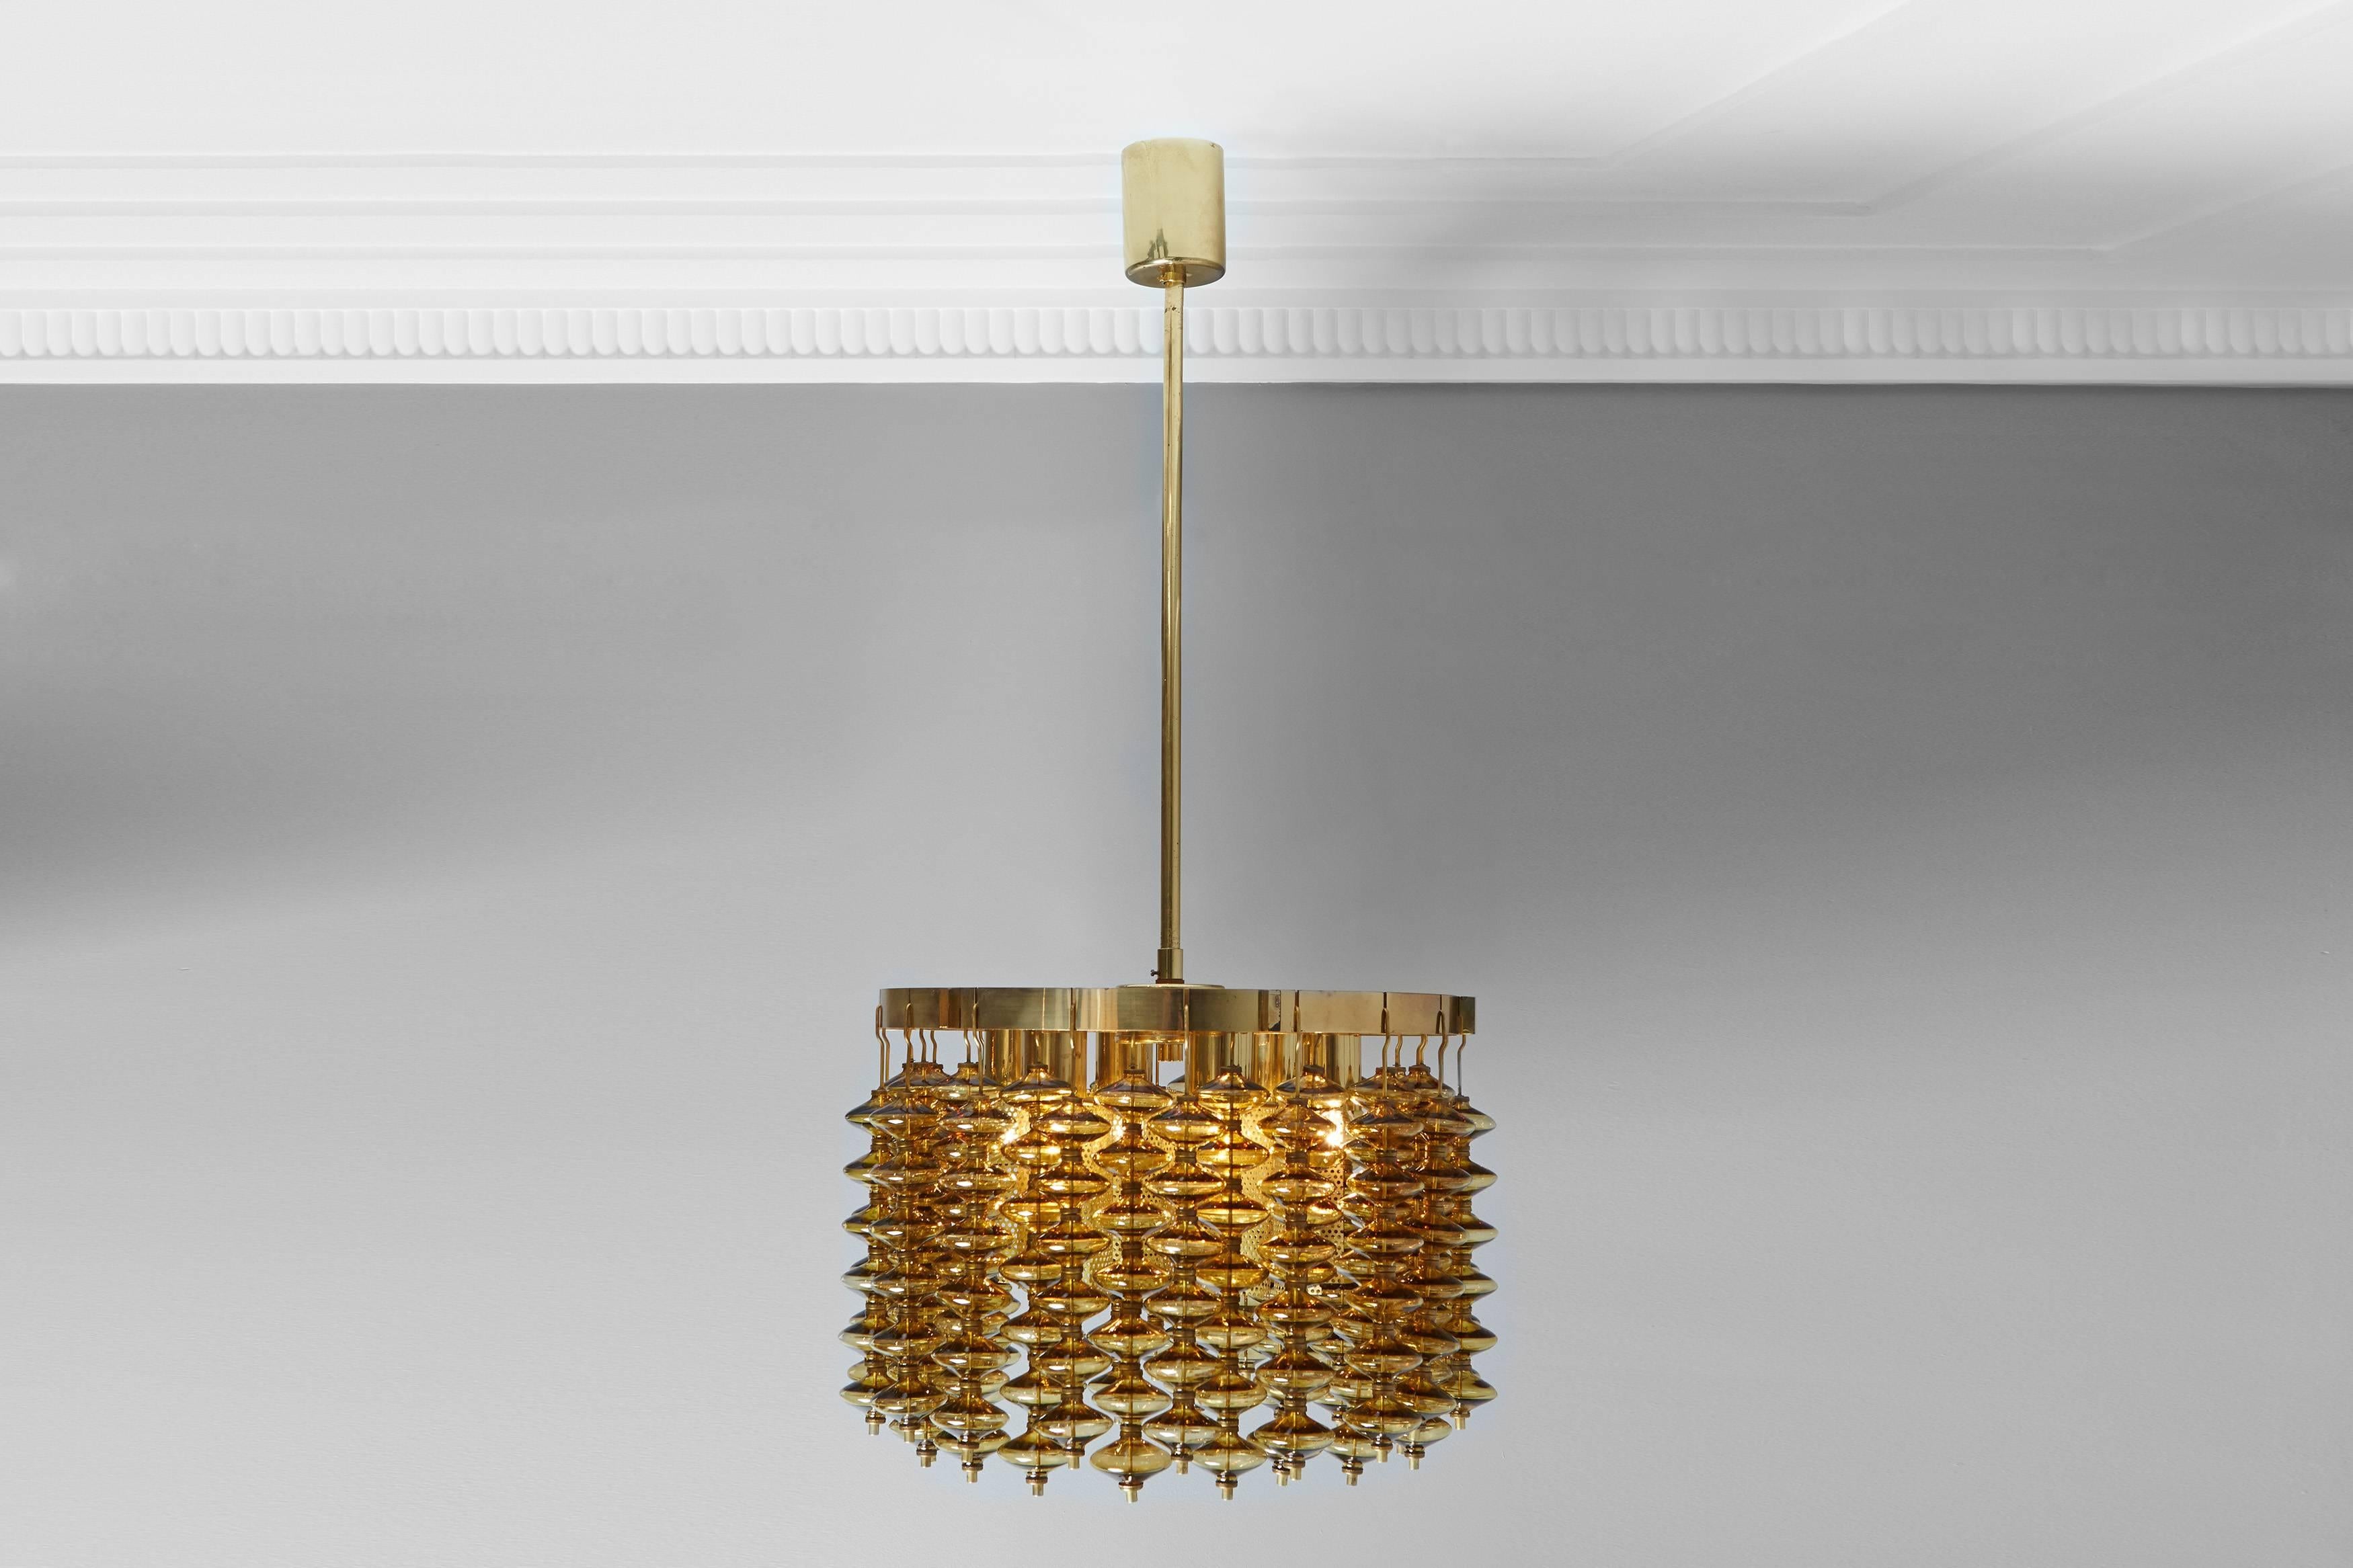 Pair of brass chandeliers decorated with smoked glass spools.
Swedish work by Hans-Agne Jakobsson, circa 1970.
Rewired.